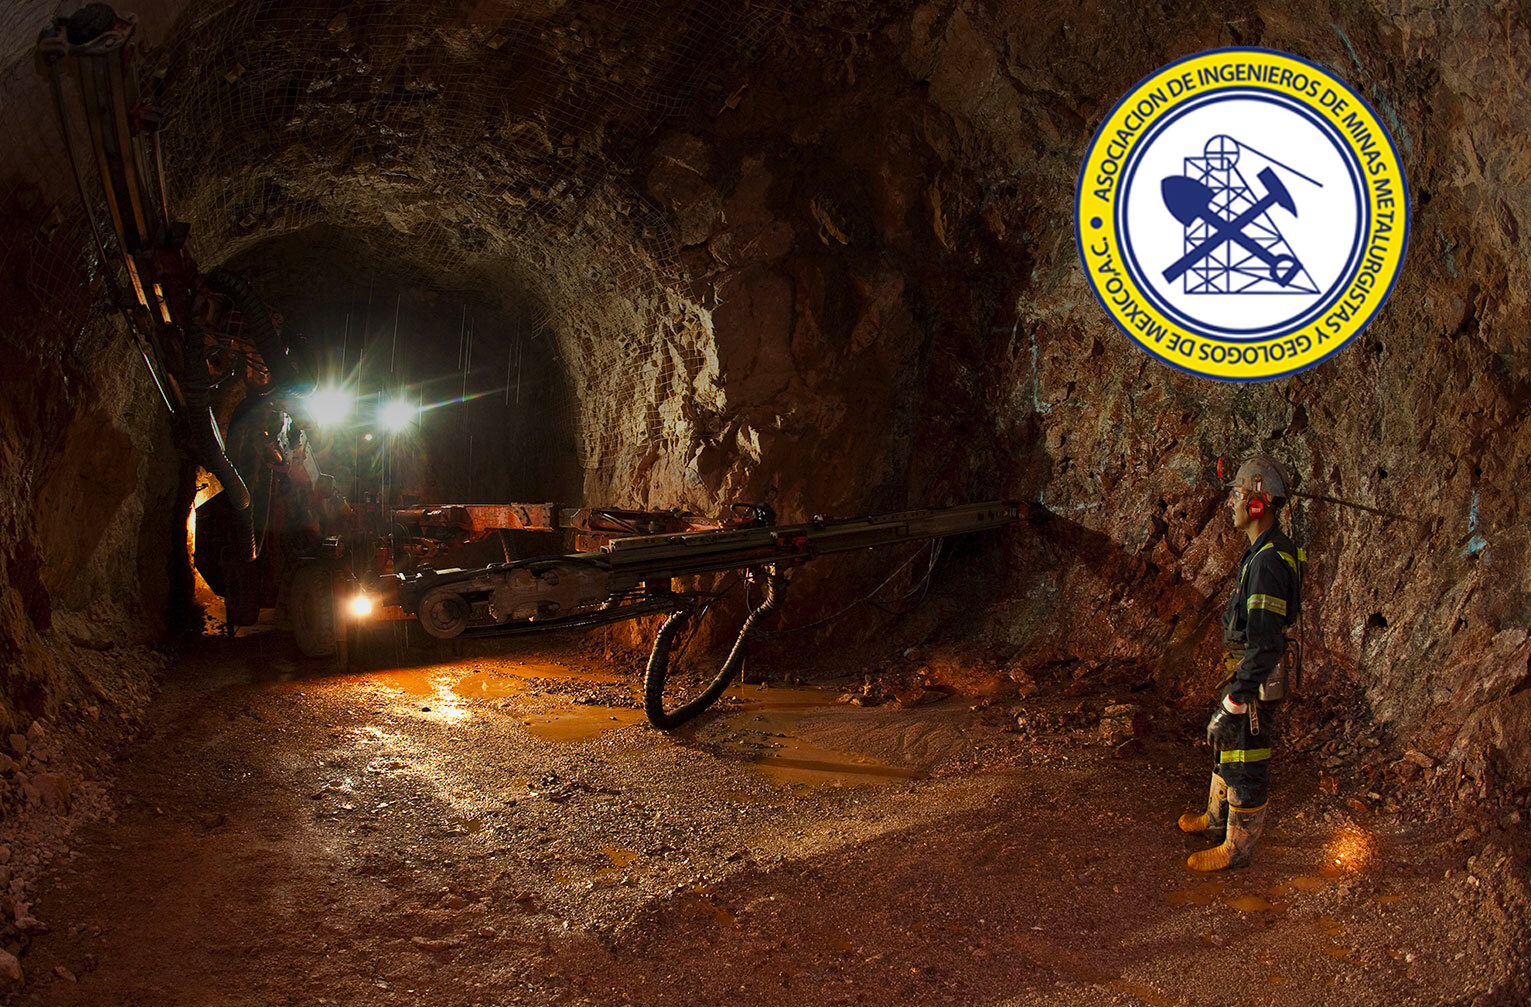 Miner inside of a mine, with the AIMMGM logo